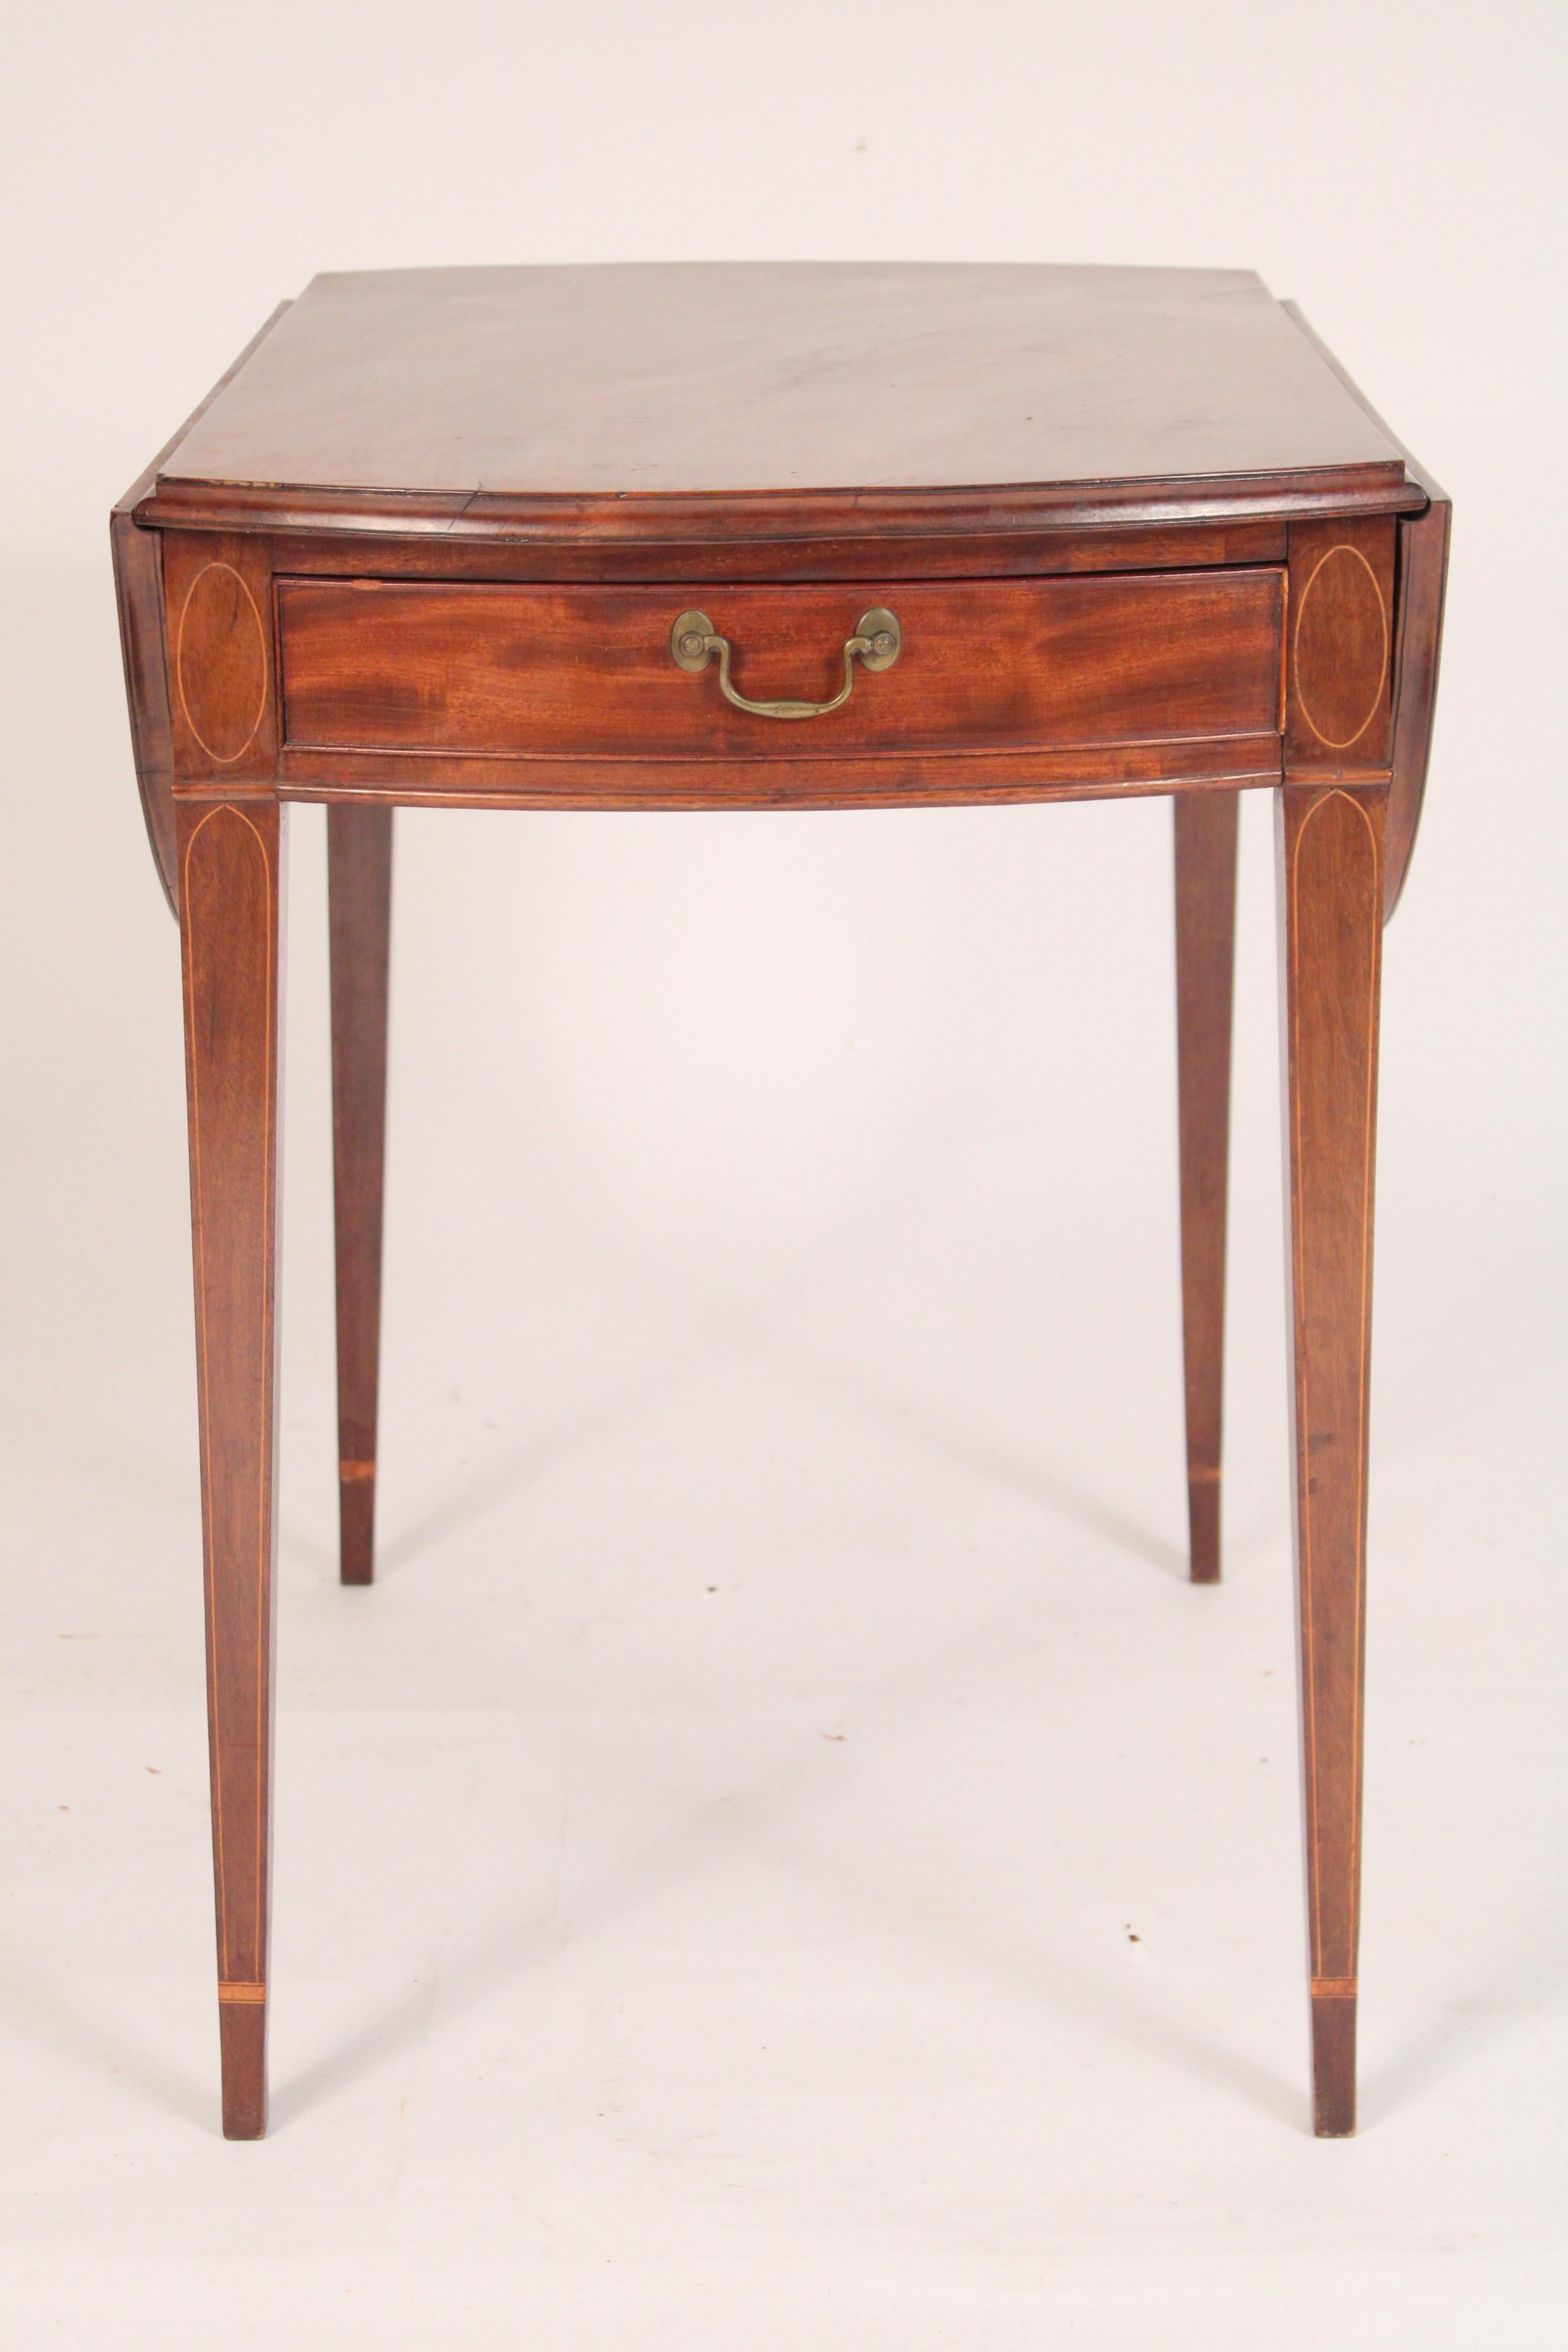 Antique George III style mahogany pembroke table, 19th century. With well figured mahogany top and D shaped drop leaves, a frieze drawer  with brass pull and square tapered legs with line inlay. Hand dove tailed drawer construction. Dimension of top